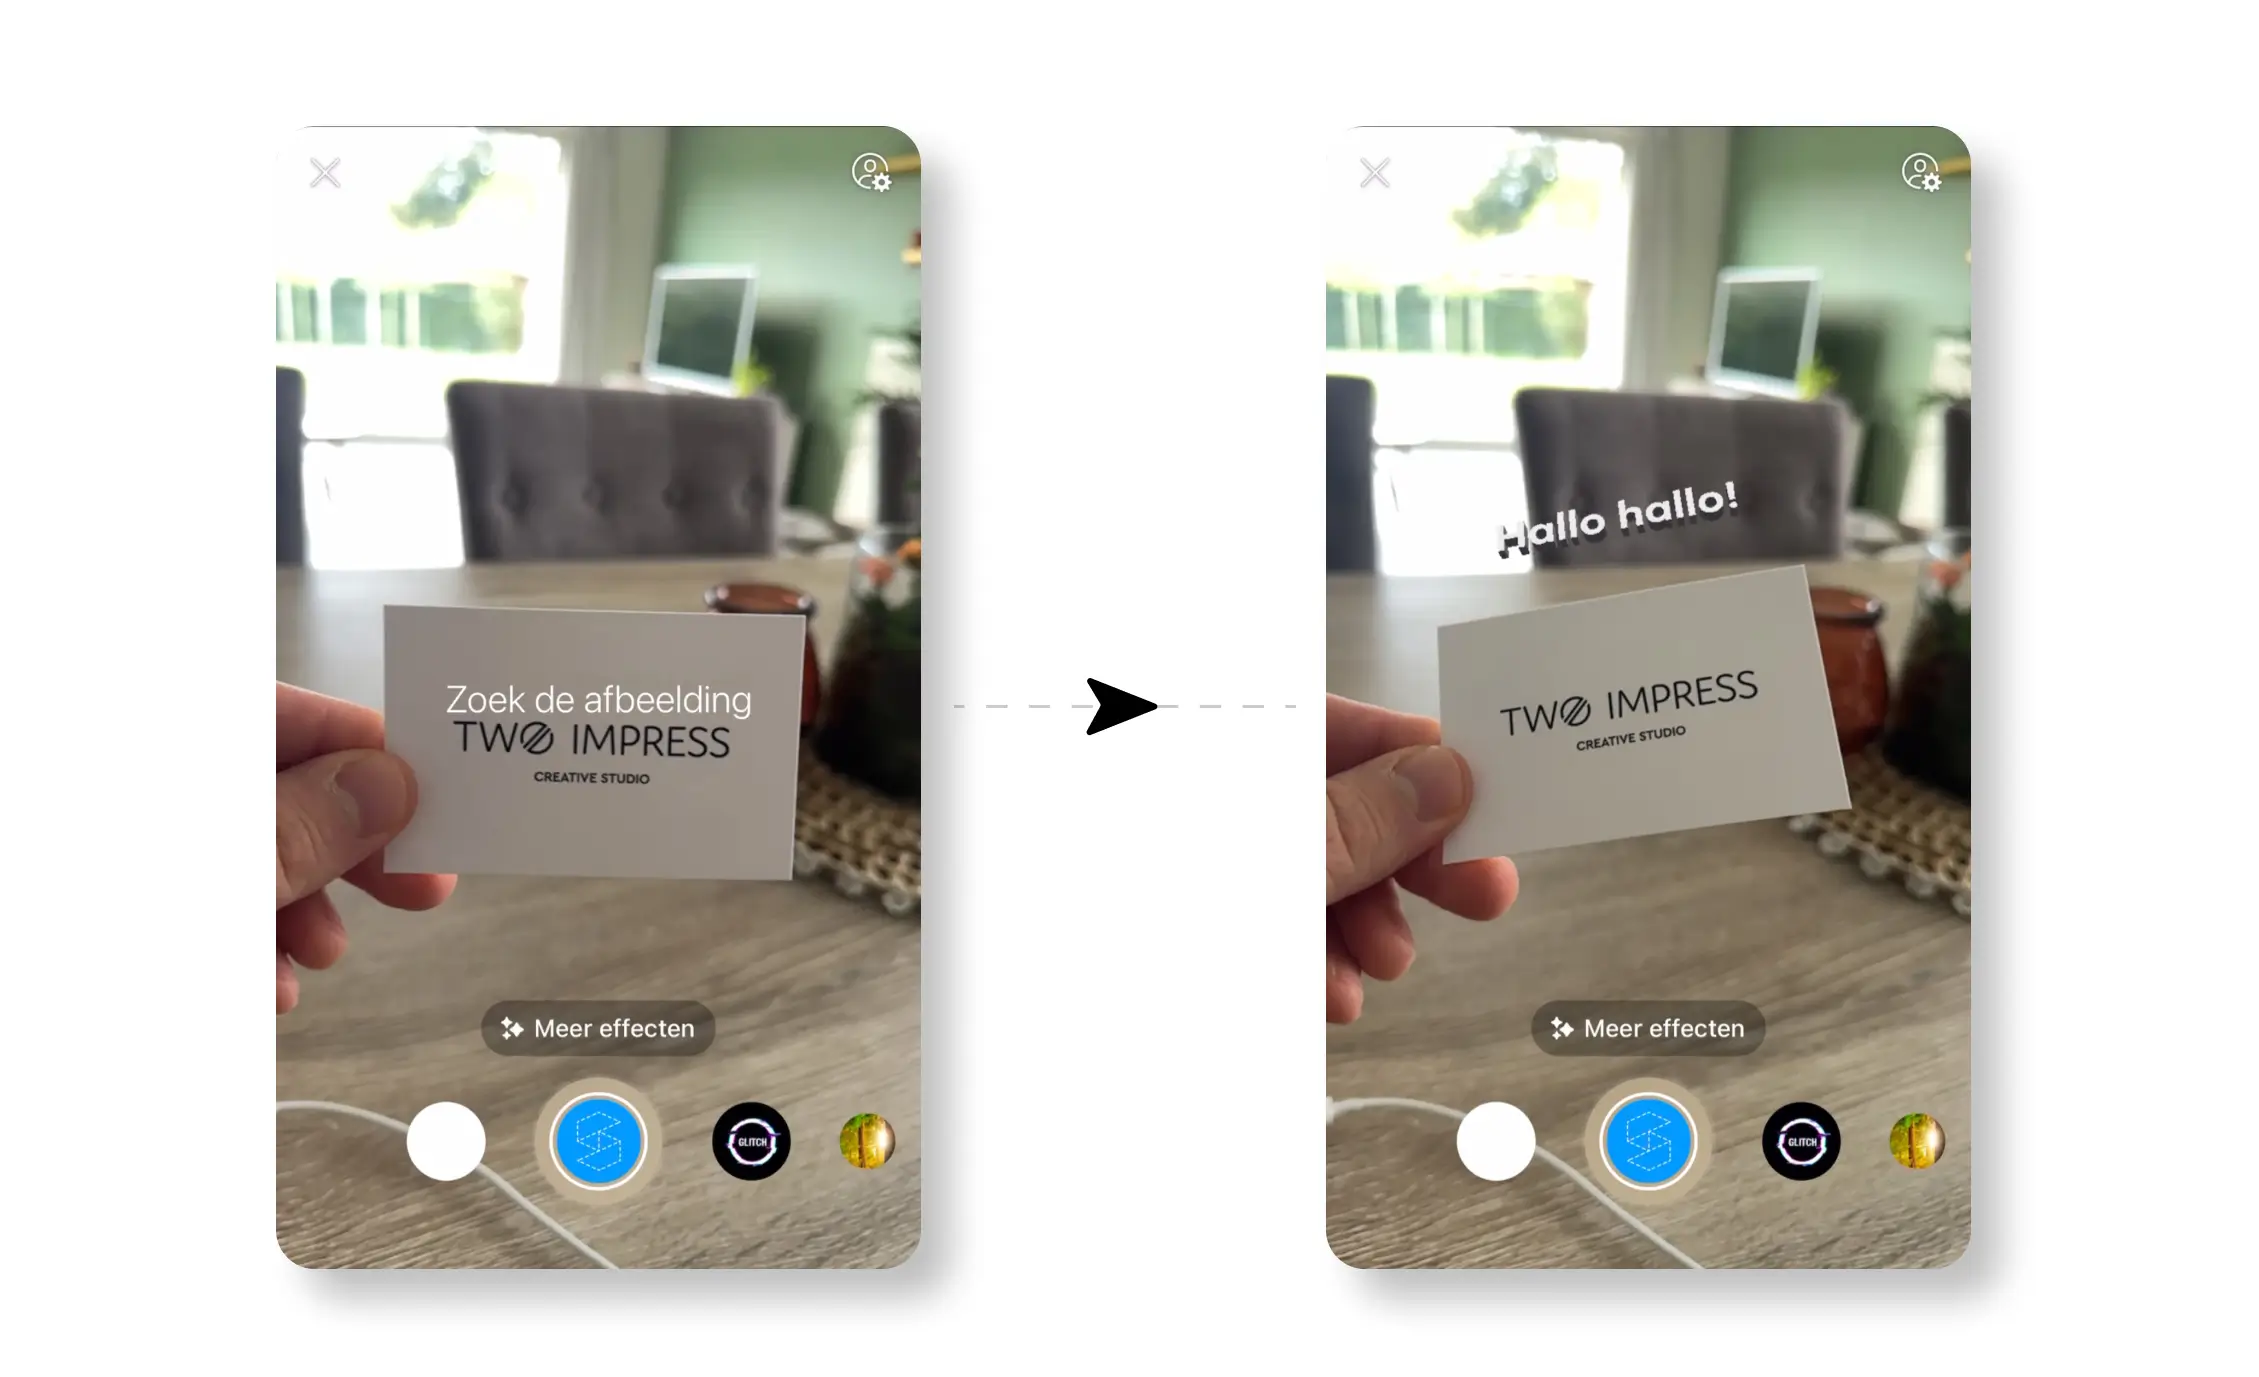 Augmented Reality - Two Impress